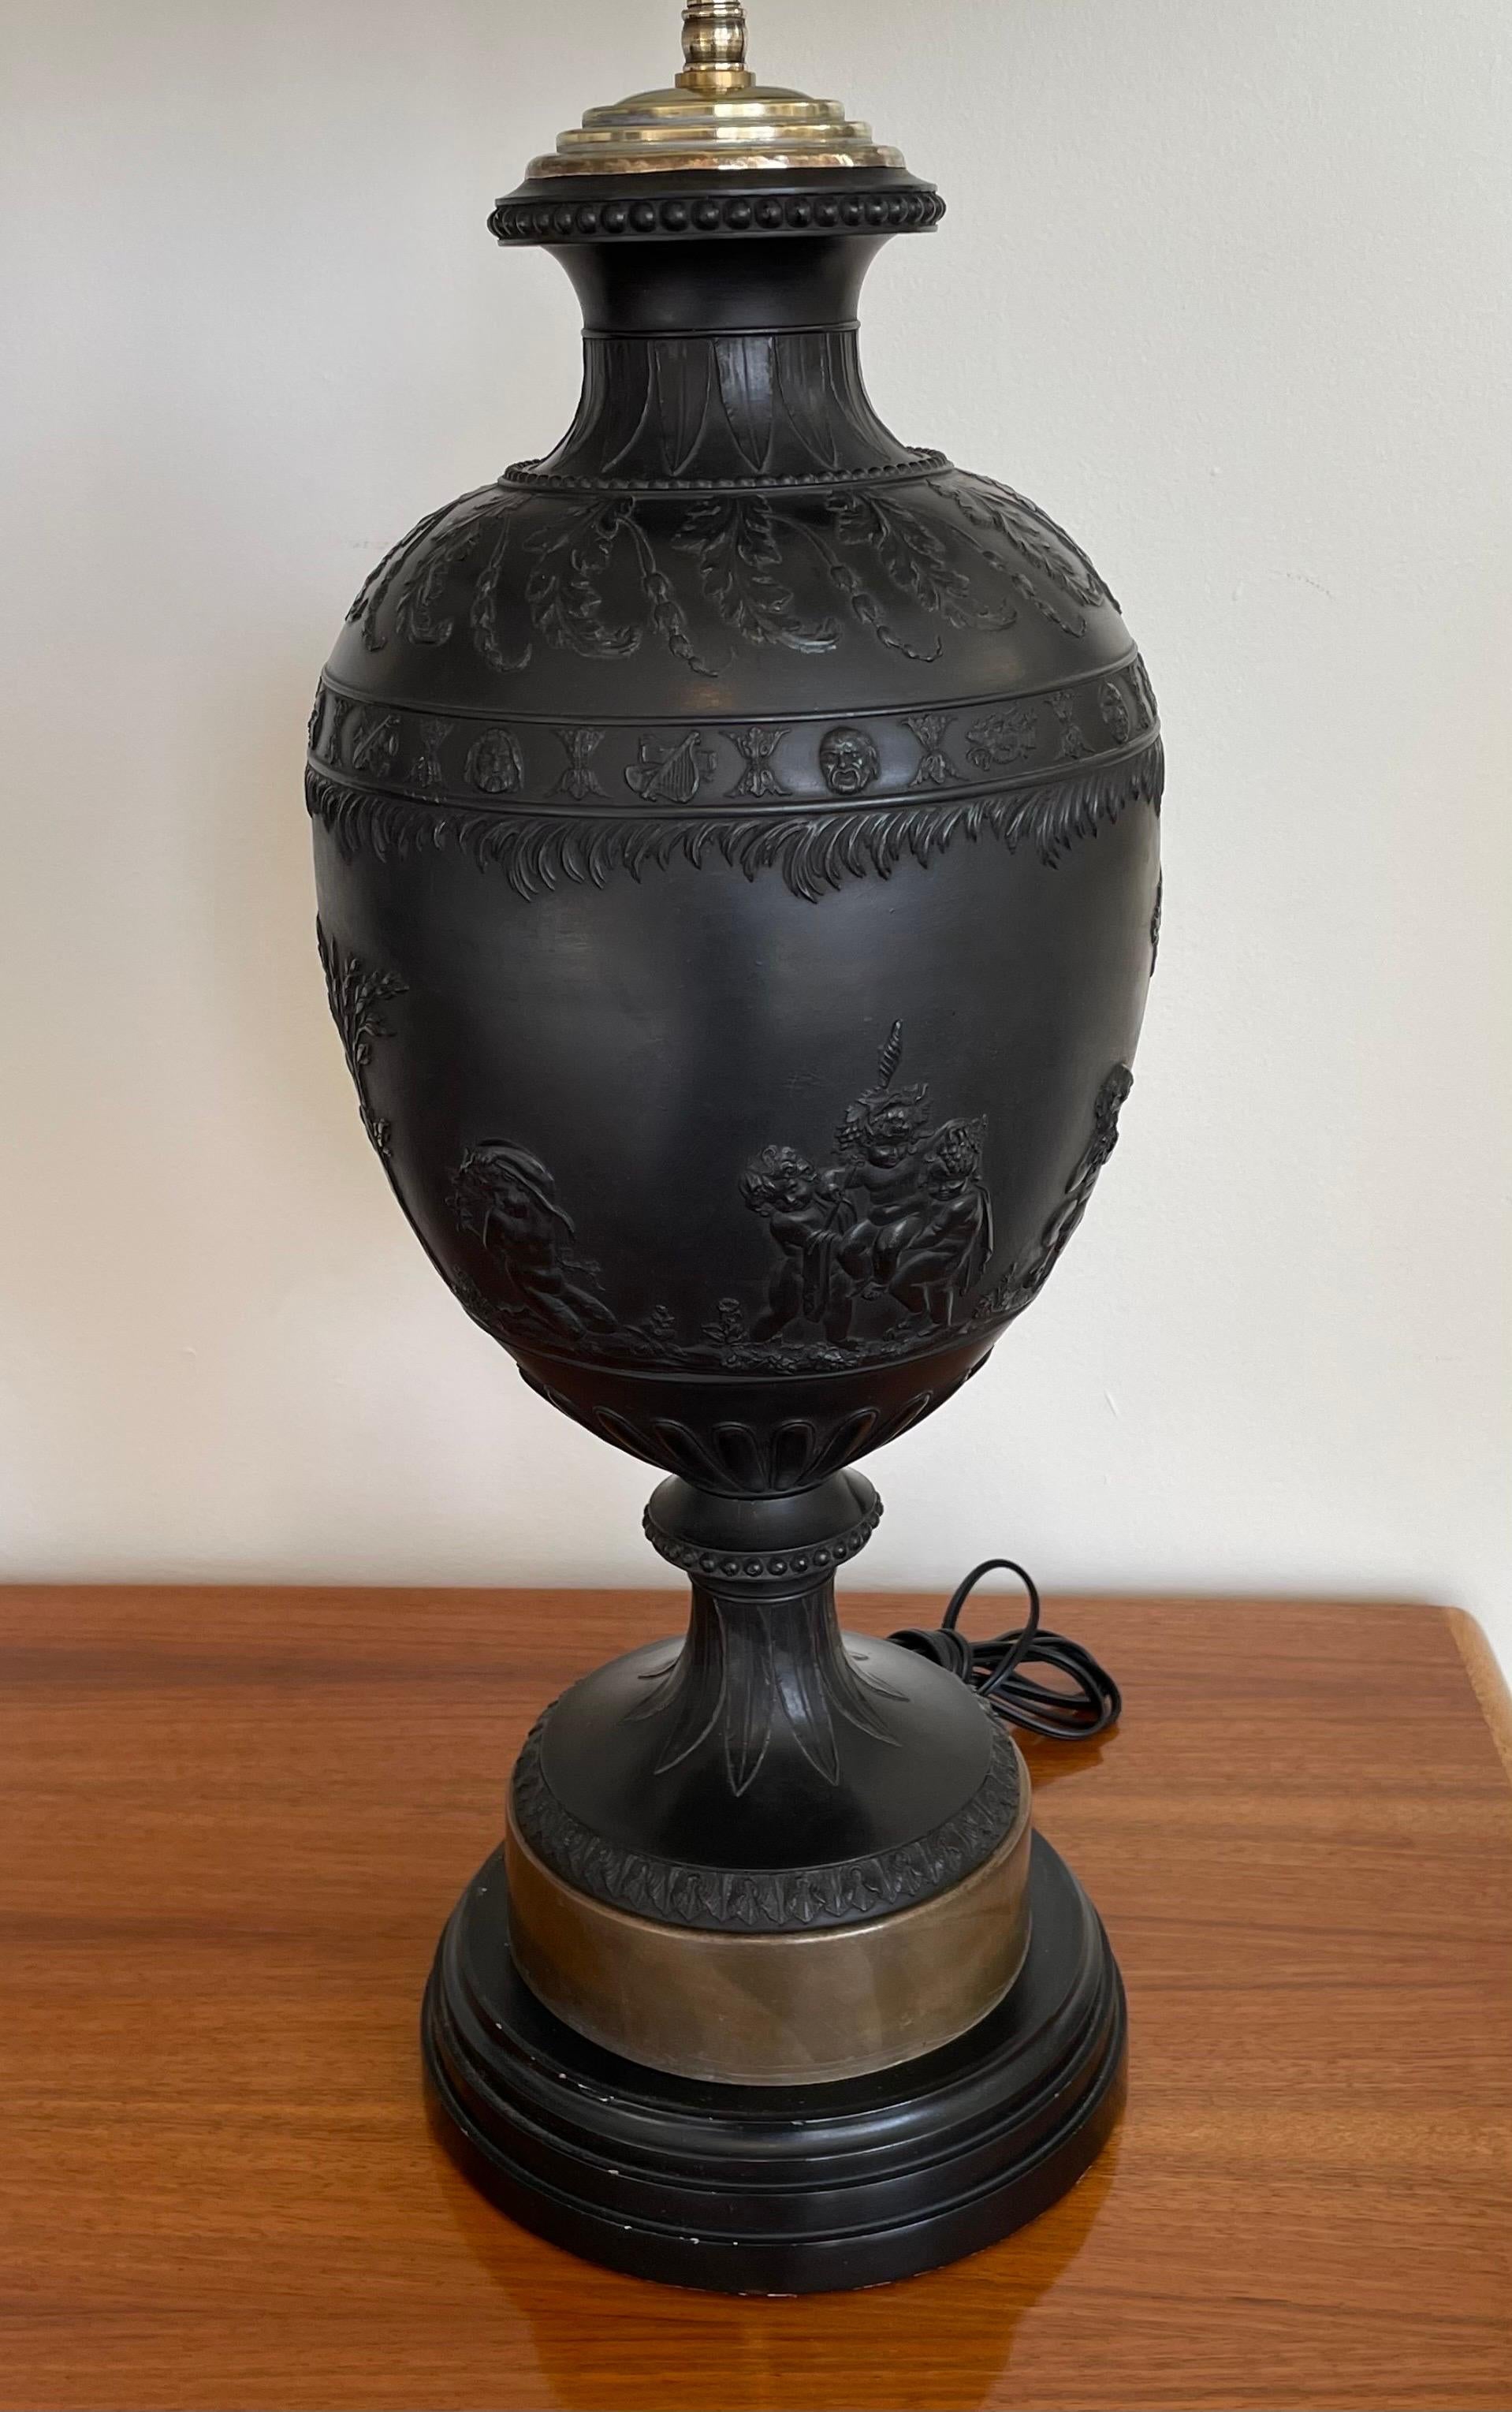 A remarkable pair of black basalt table lamps by Josiah Wedgwood, massive in size and very rare, hallmarked. Professionally cleaned and rewired with new solid brass sockets. Total height to top of shade is 35.50